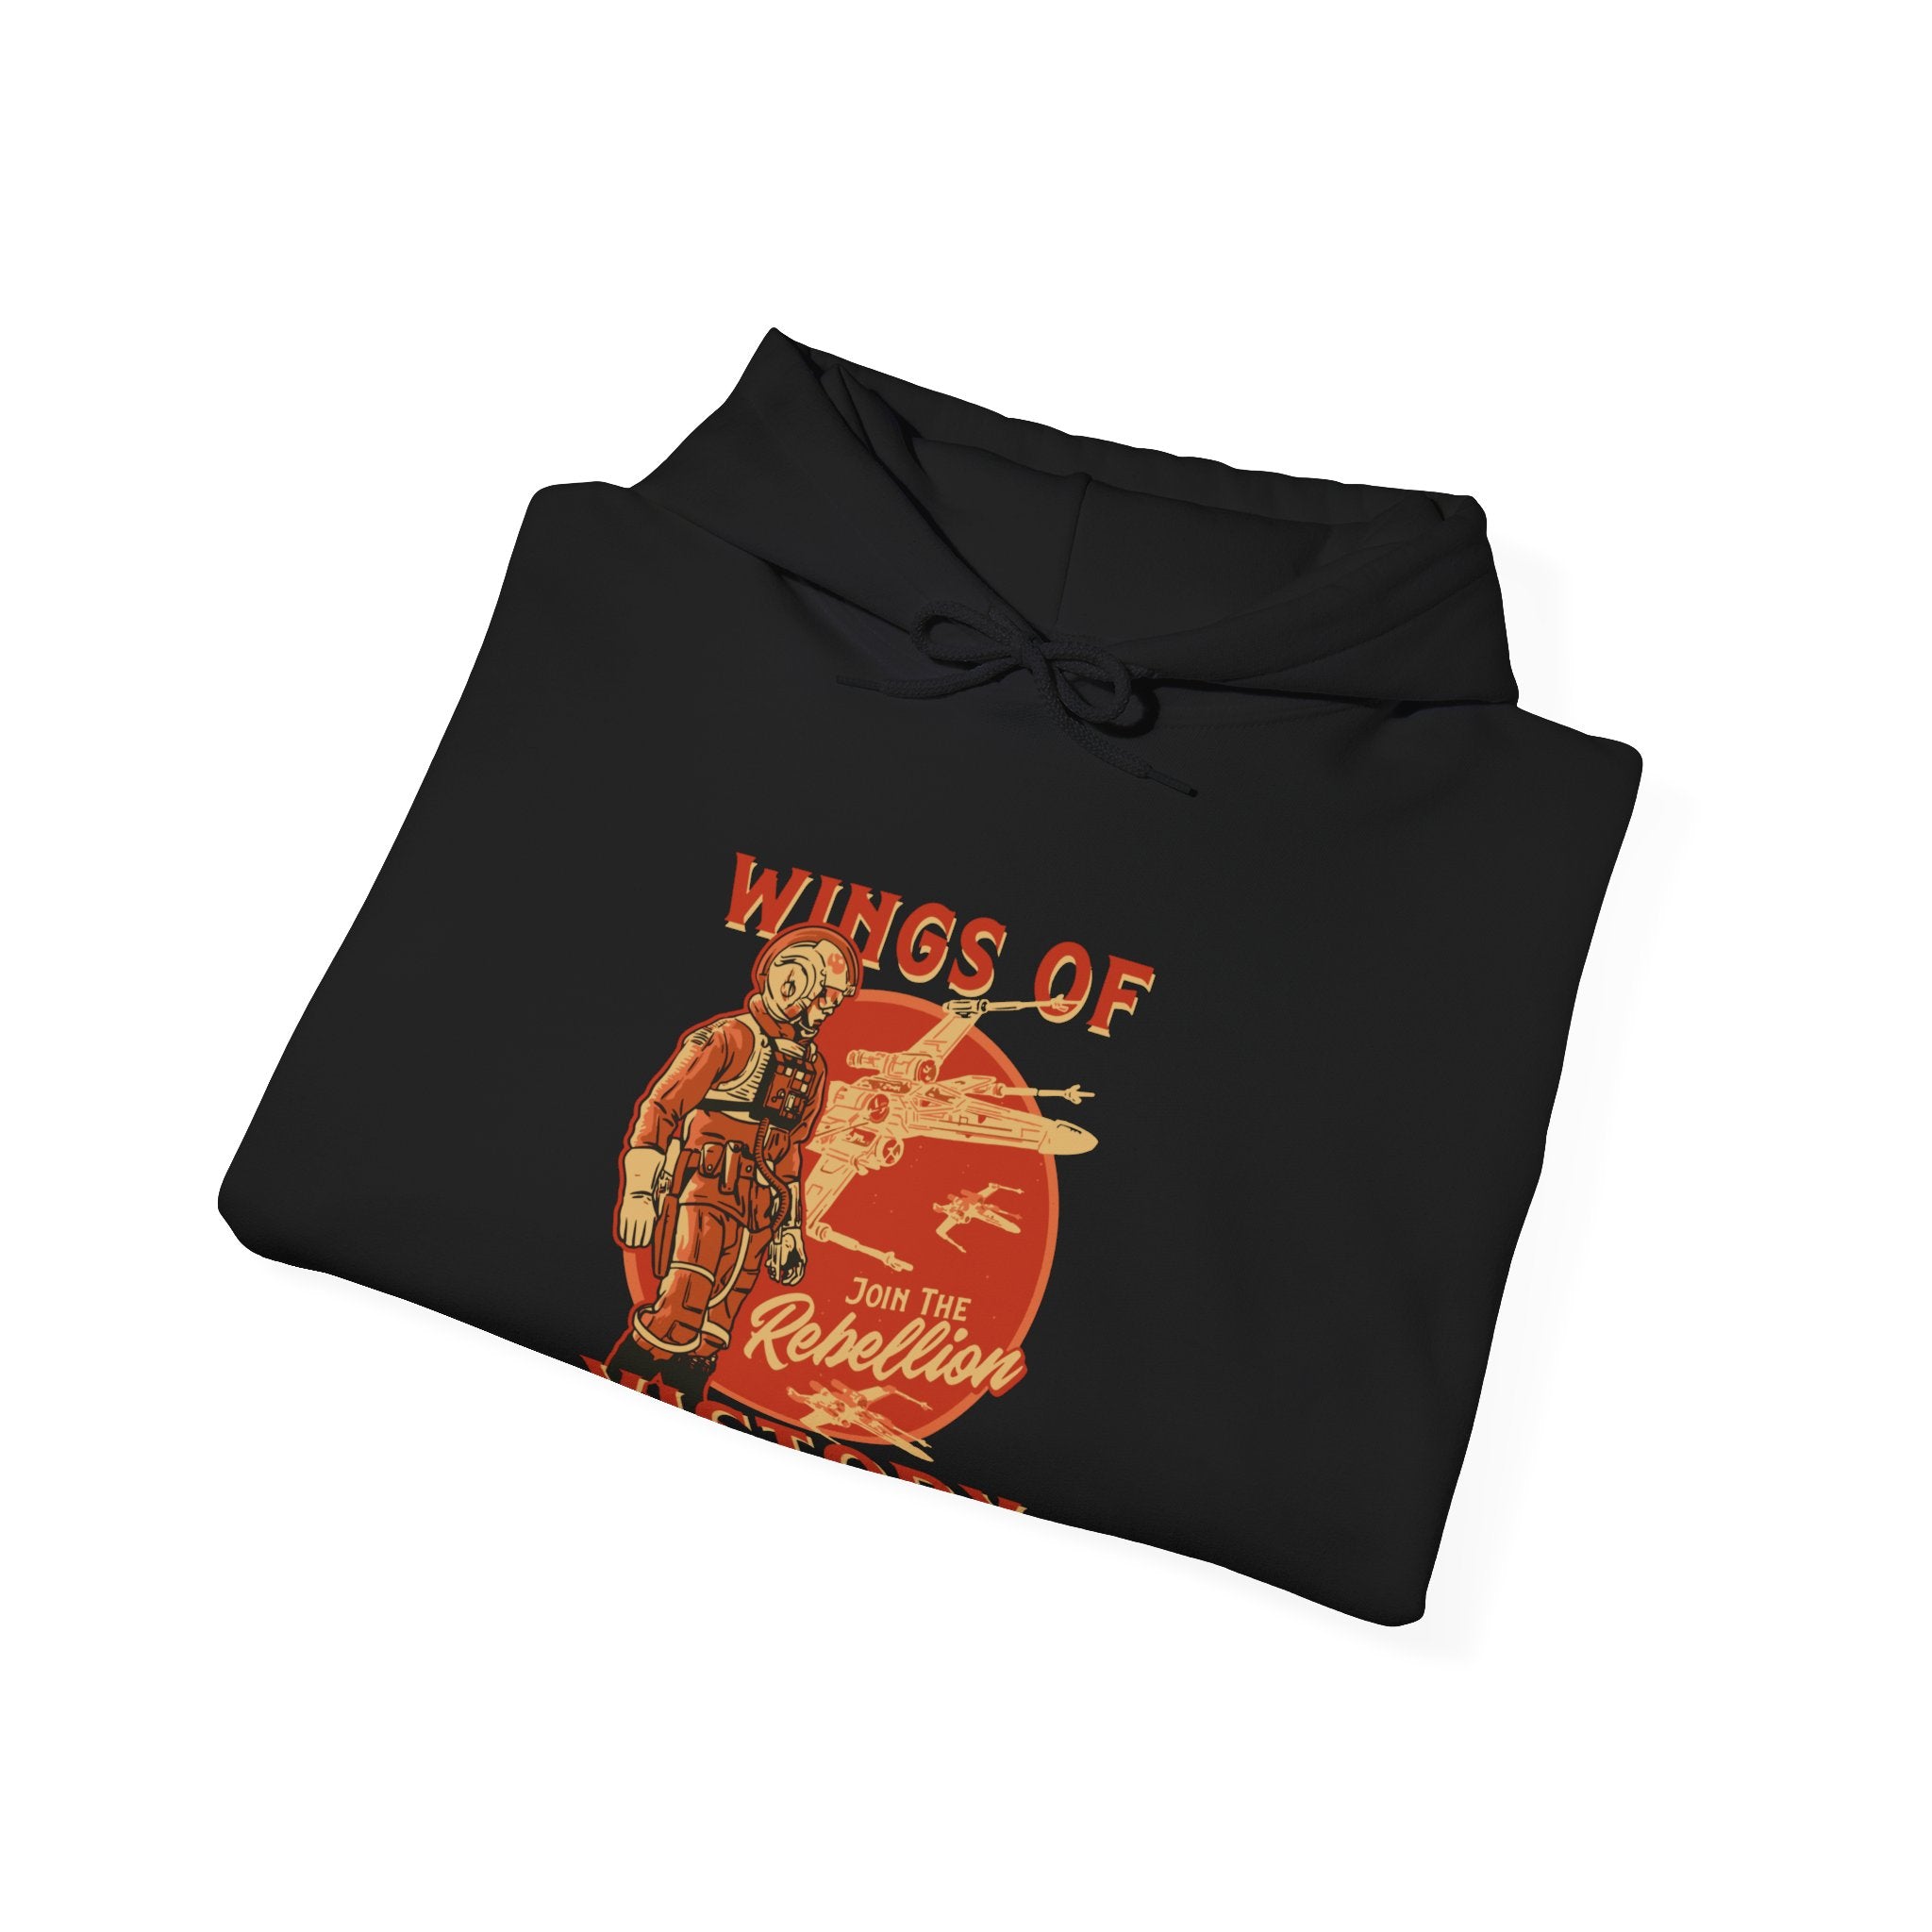 A folded black hooded sweatshirt features a graphic of a robot and spaceships. The text reads "Wings of the Rebellion," making the **Wings of Victory - Hooded Sweatshirt** a standout piece in fashion for those who dare to defy.